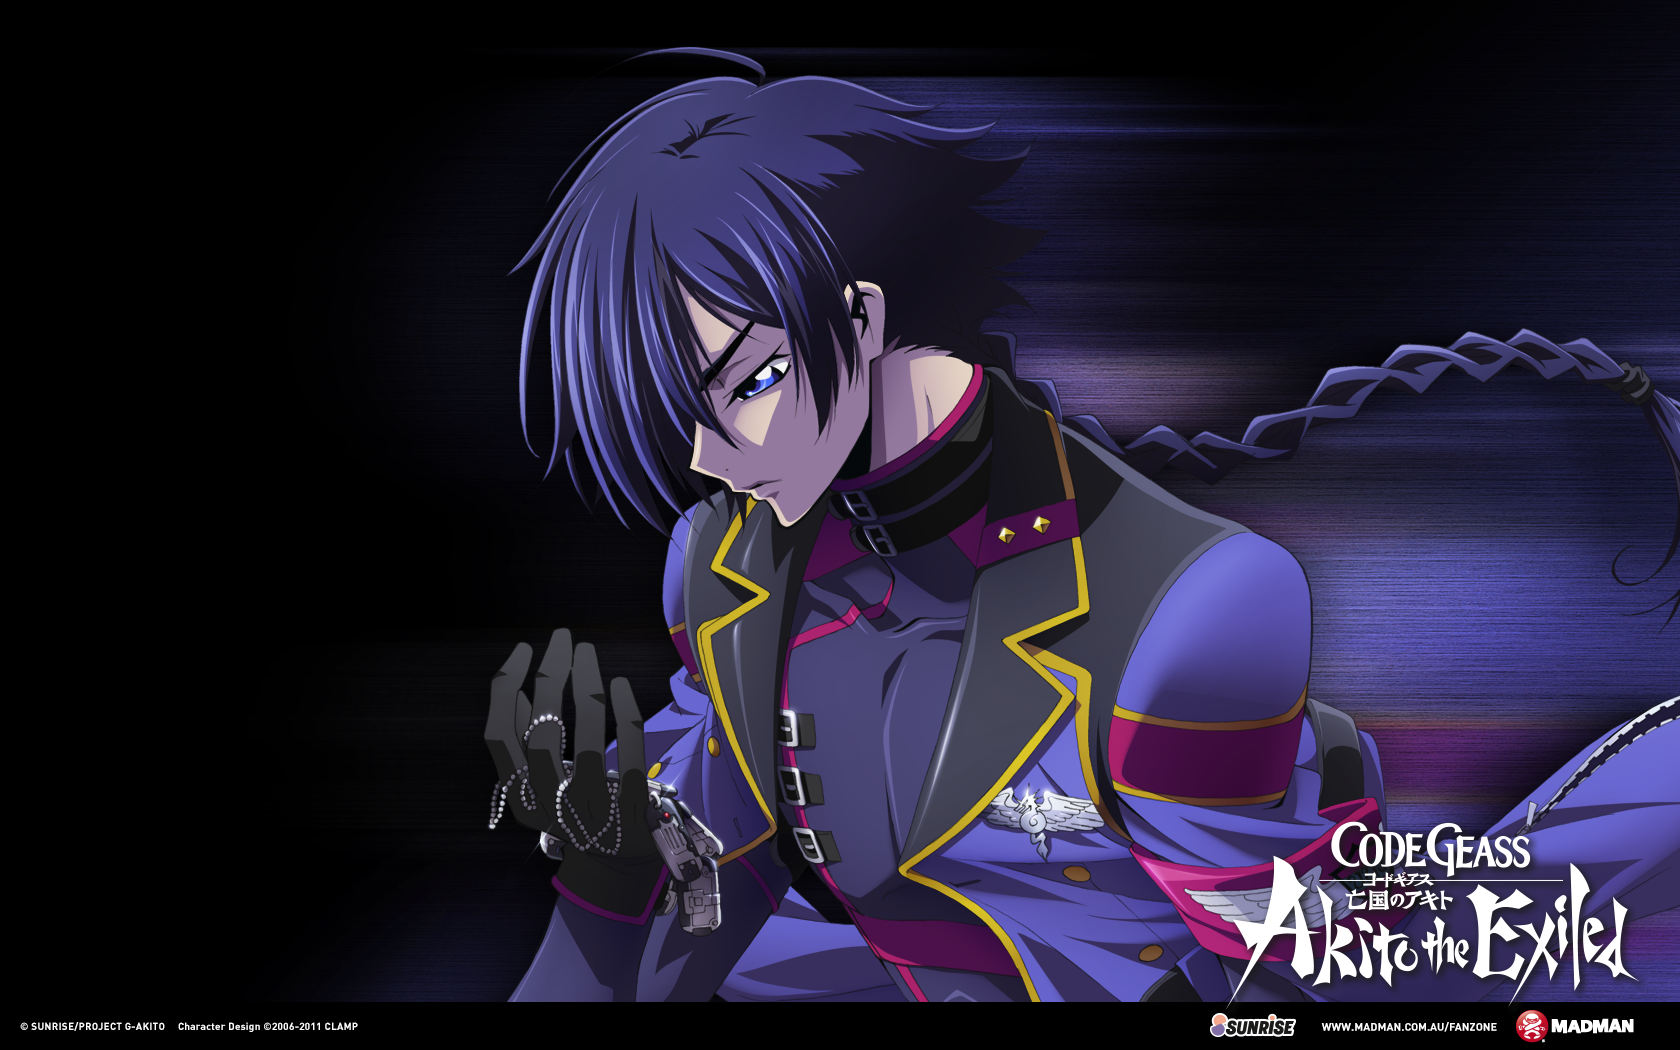 Cover image of Code Geass: Akito the Exiled 5 - To Beloved Ones (Dub)